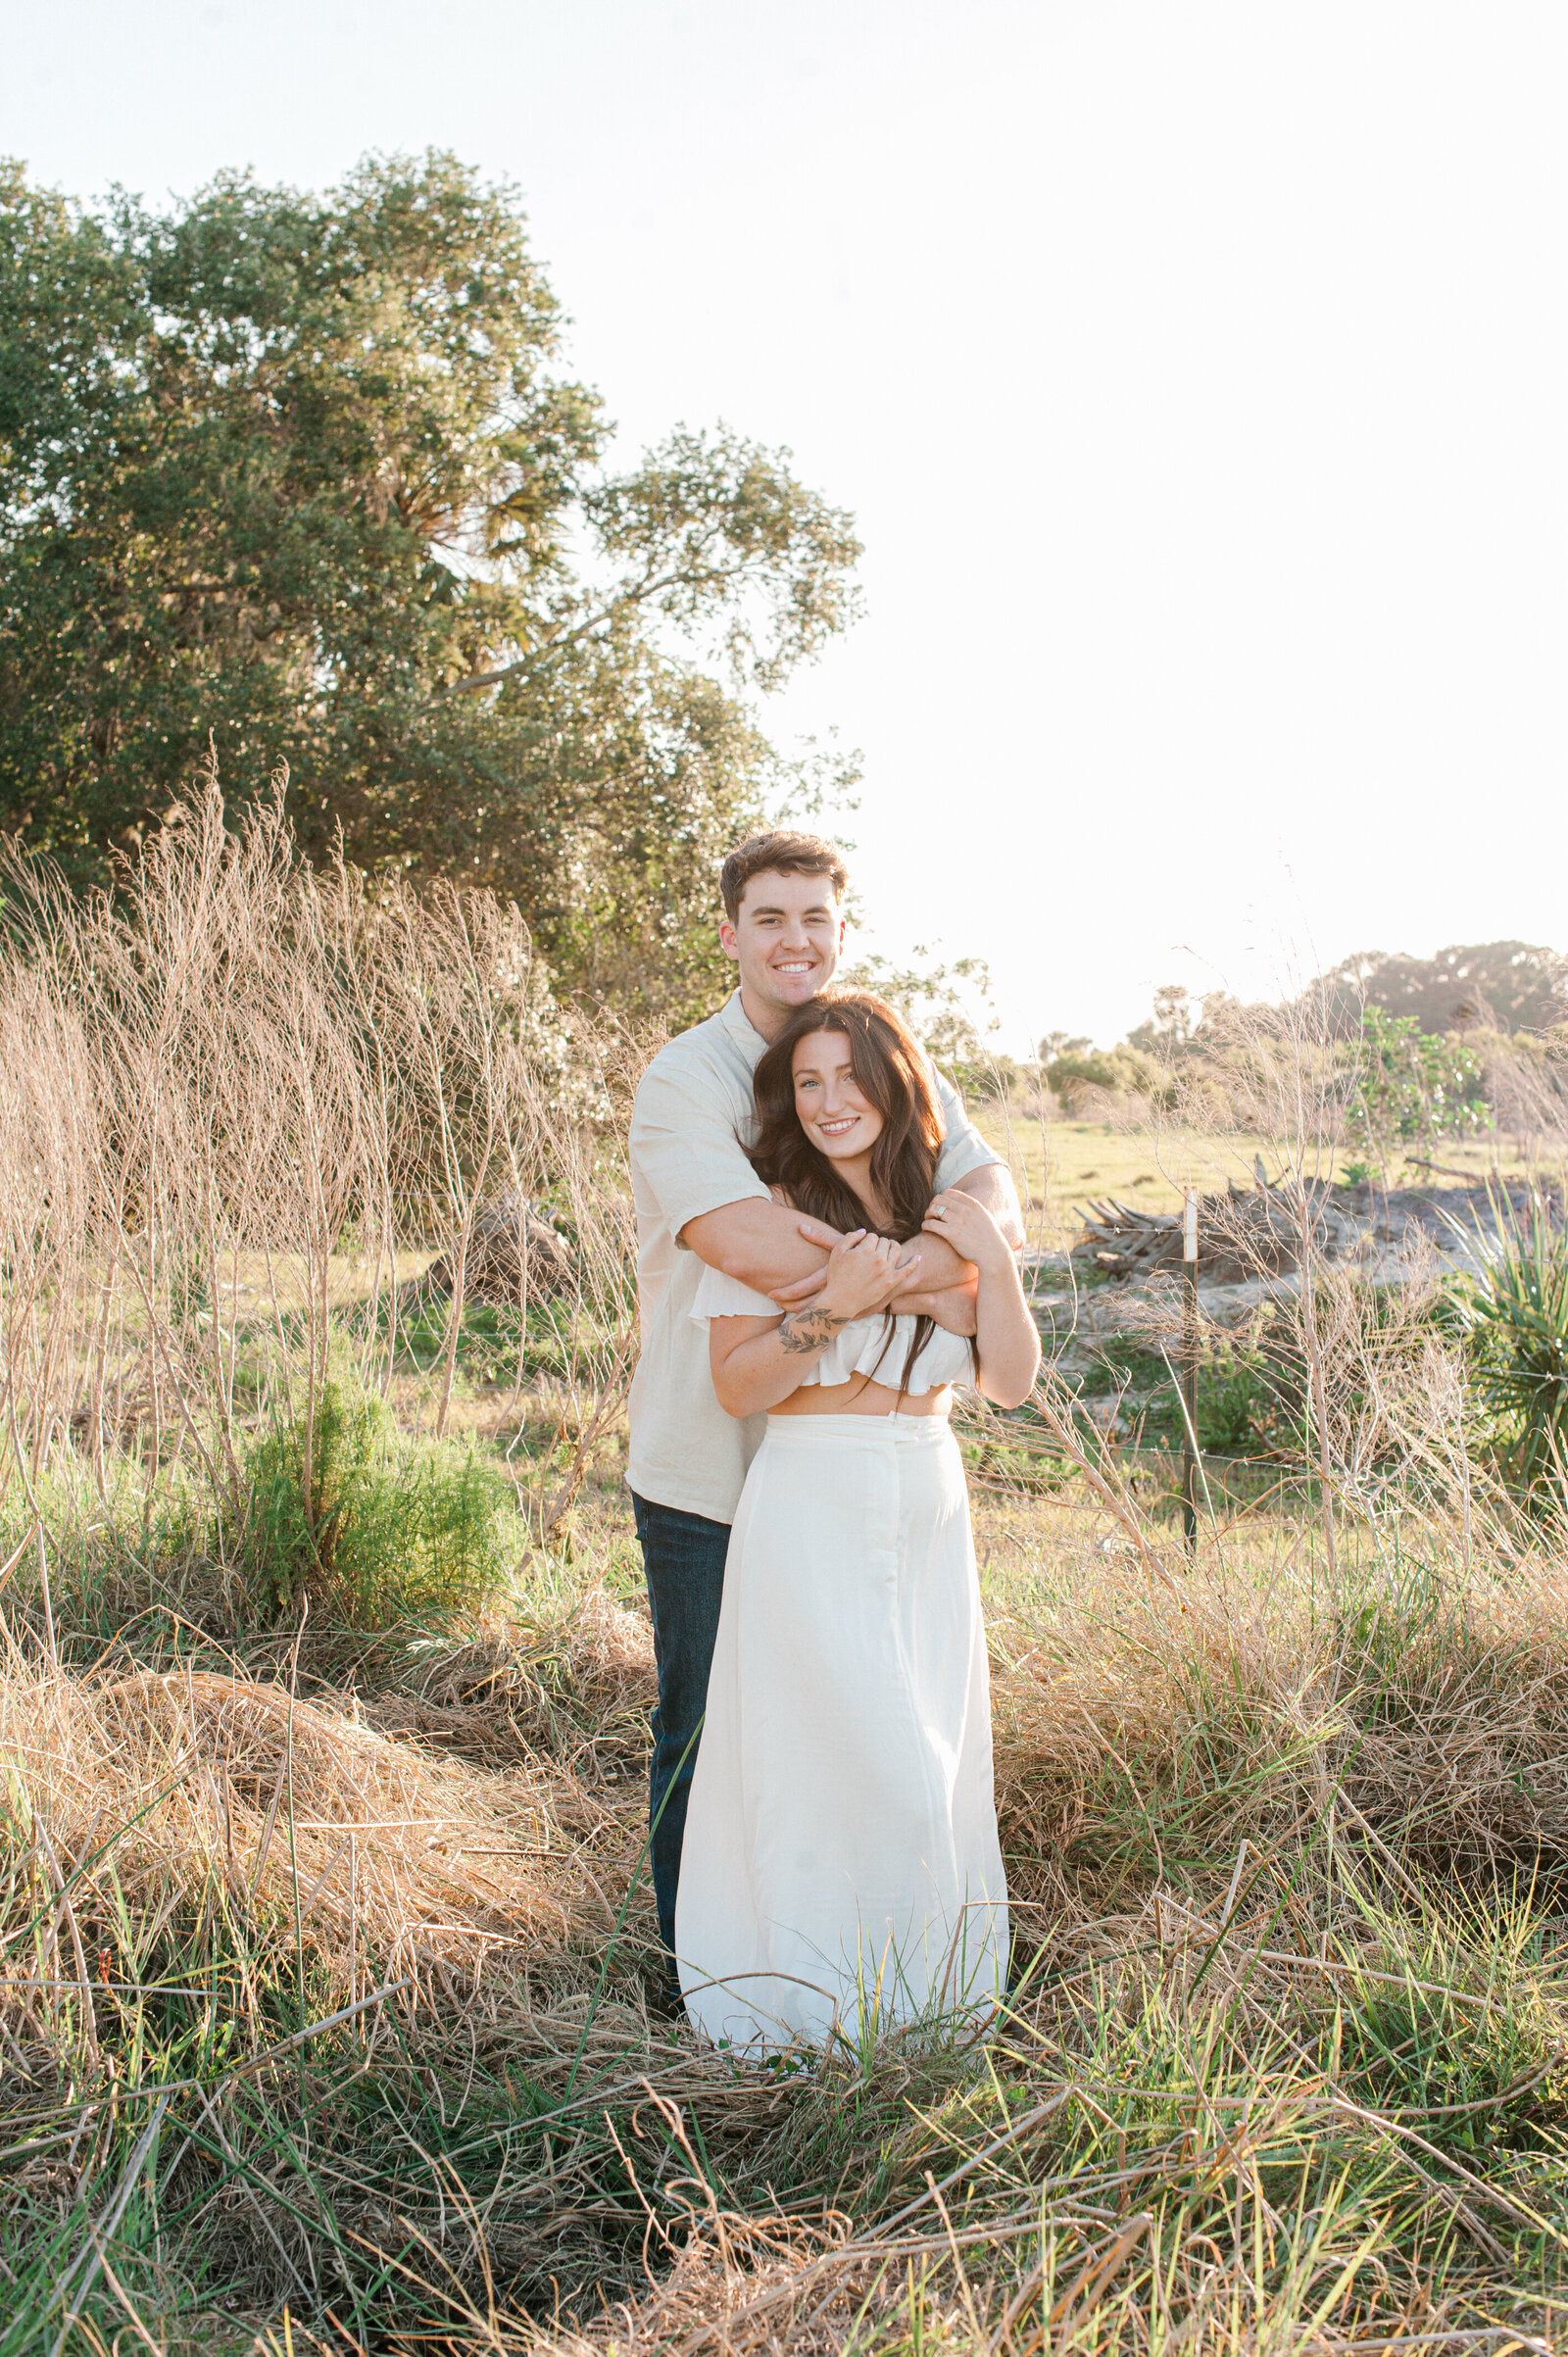 Couples stands in a tall grass field embracing during golden hour